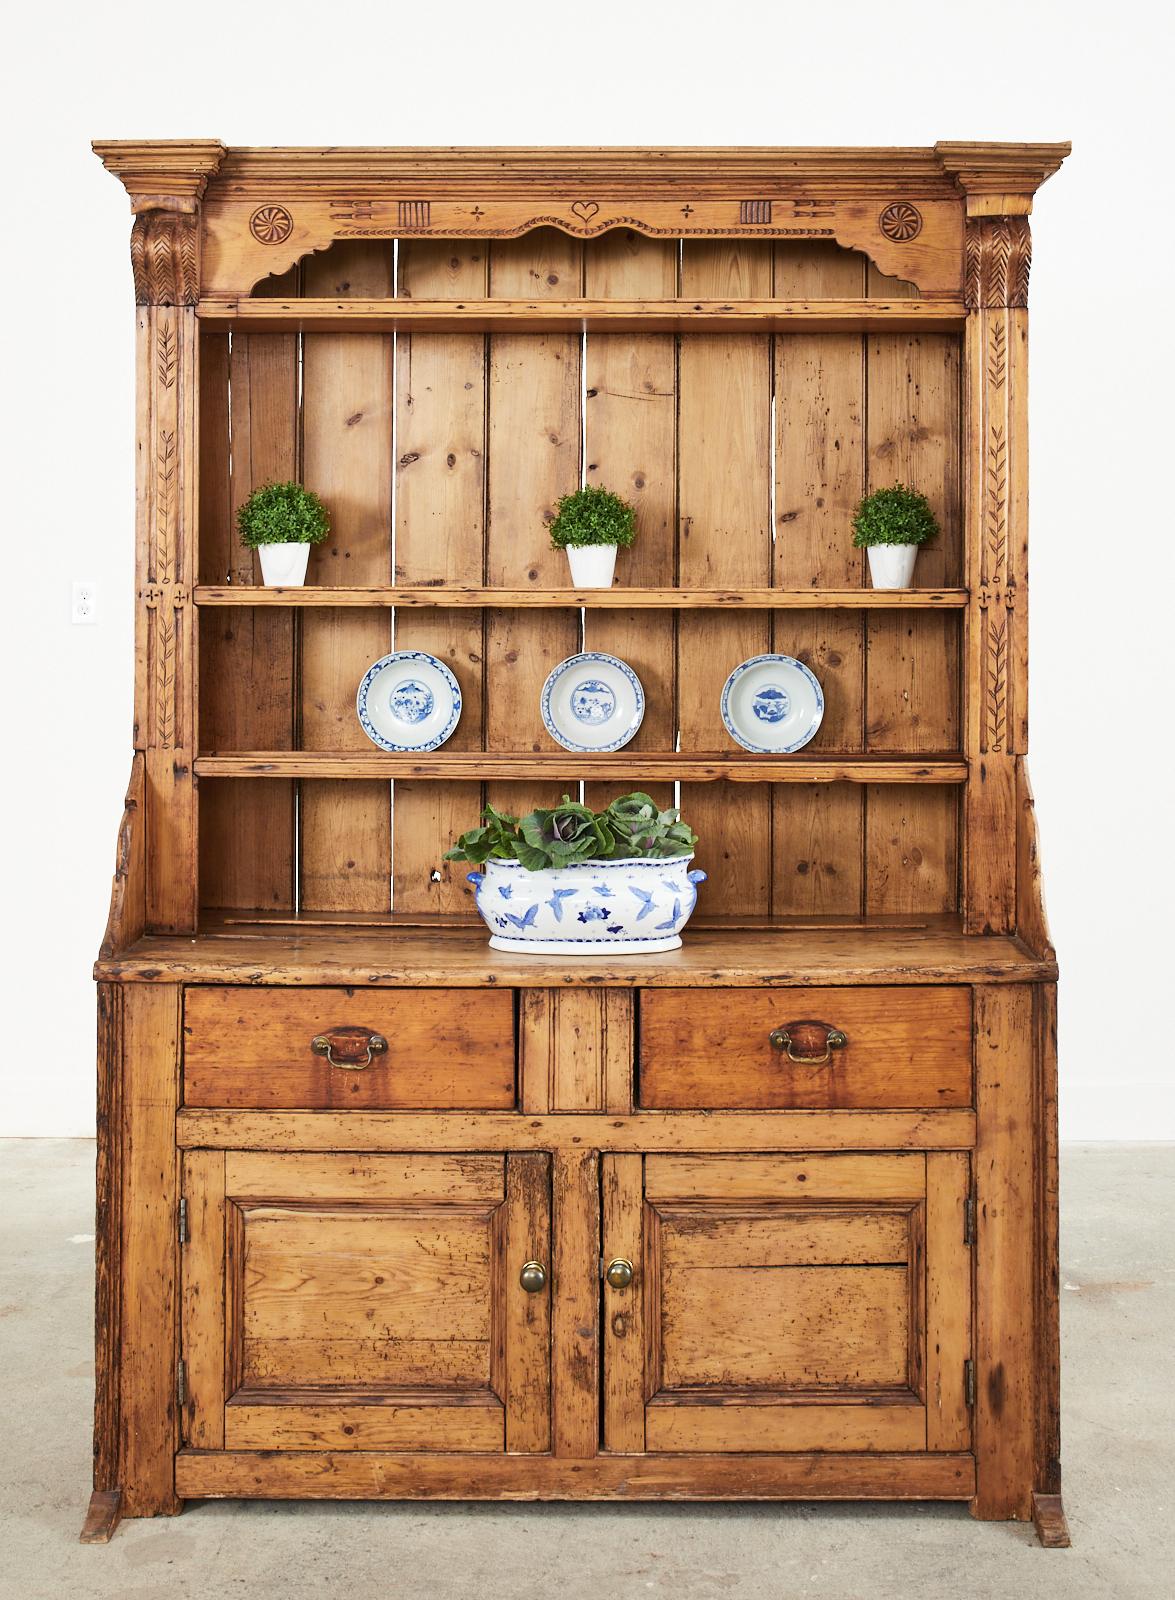 Two-part weathered 19th century country English welsh dresser cabinet or sideboard buffet crafted from pine. Beautifully aged with a desirable patina on the pine finish. The sideboard dresser has two large storage drawers with two doors below